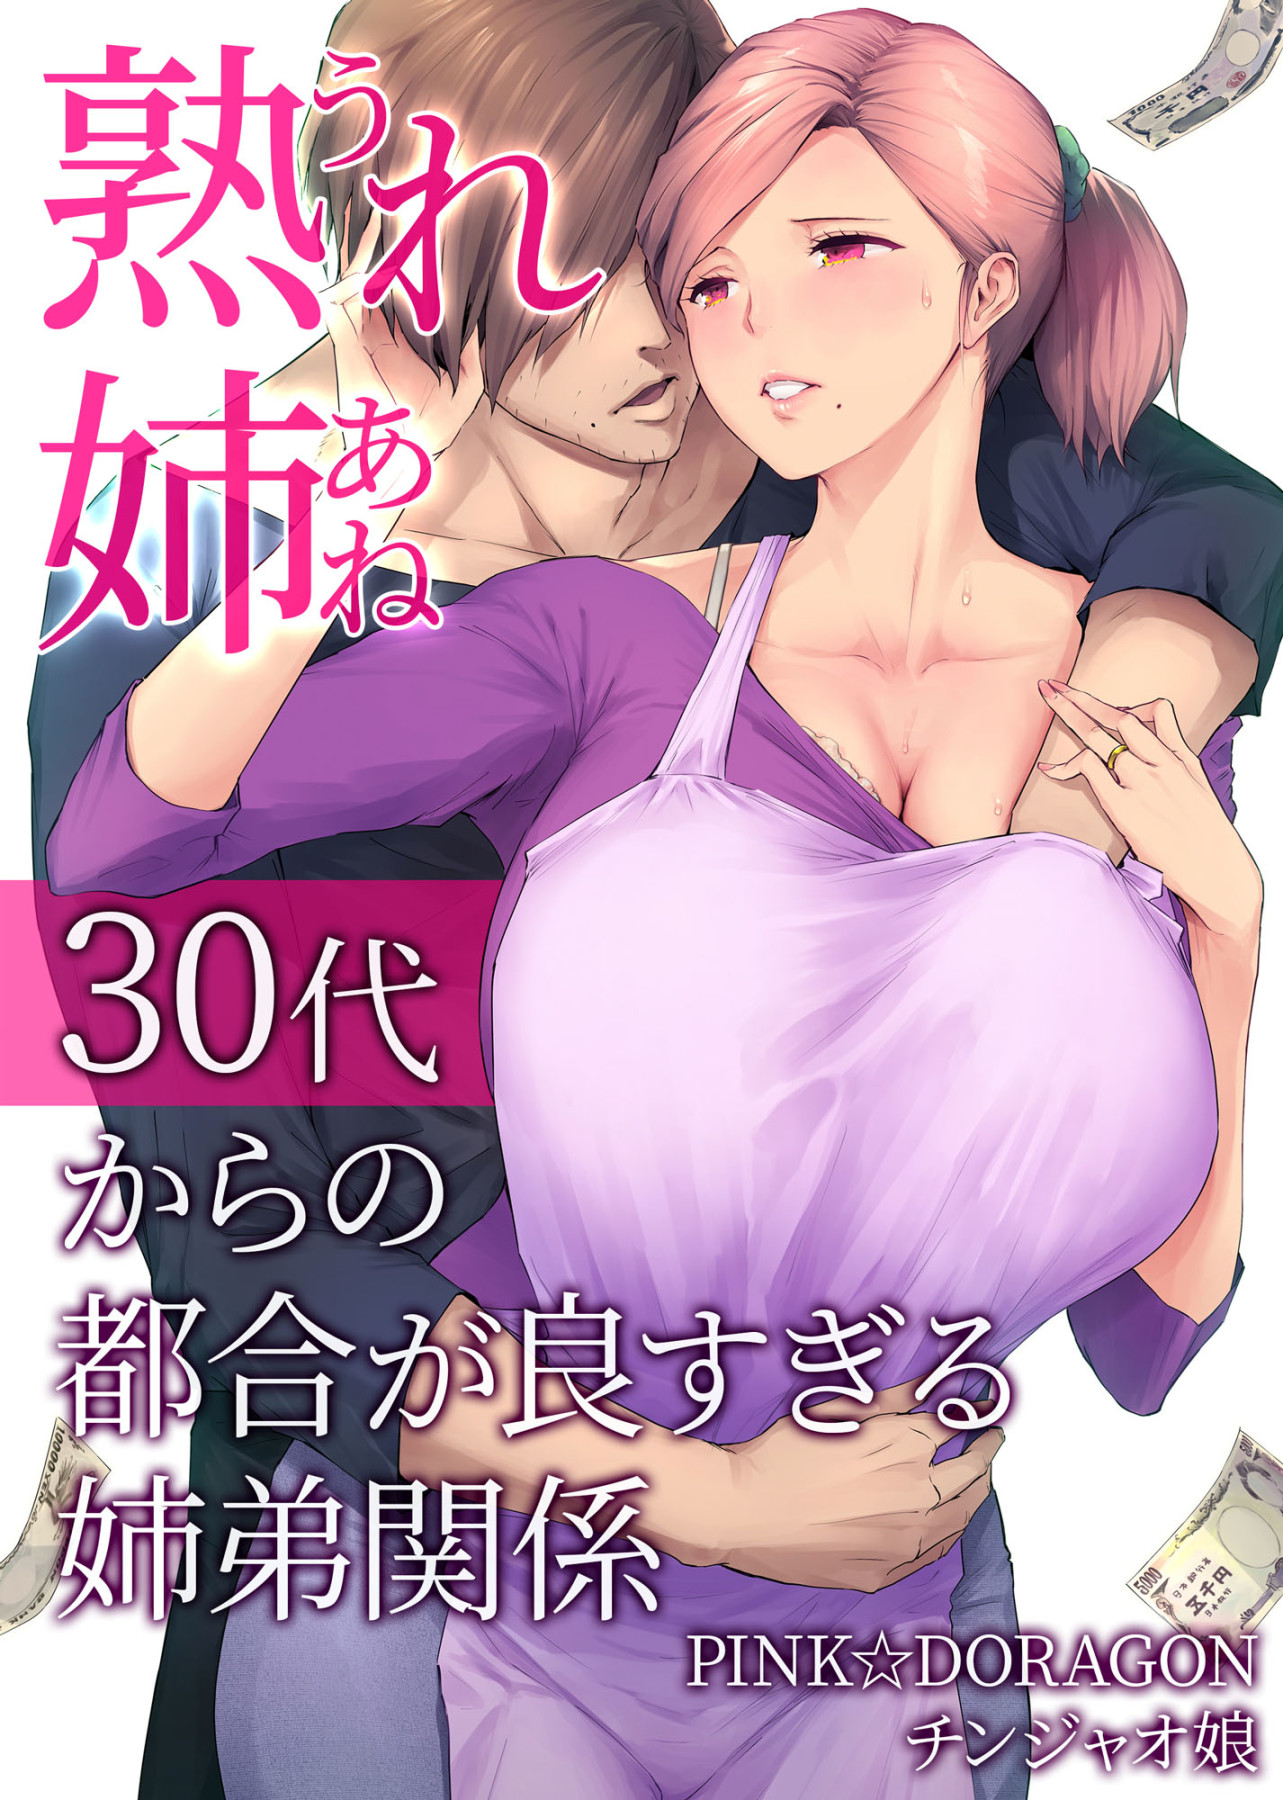 Hentai Manga Comic-My Mature Older Sister ~The Crazy Convenient Relationship of An Older Sister and Younger Brother In Their 30s-Read-1